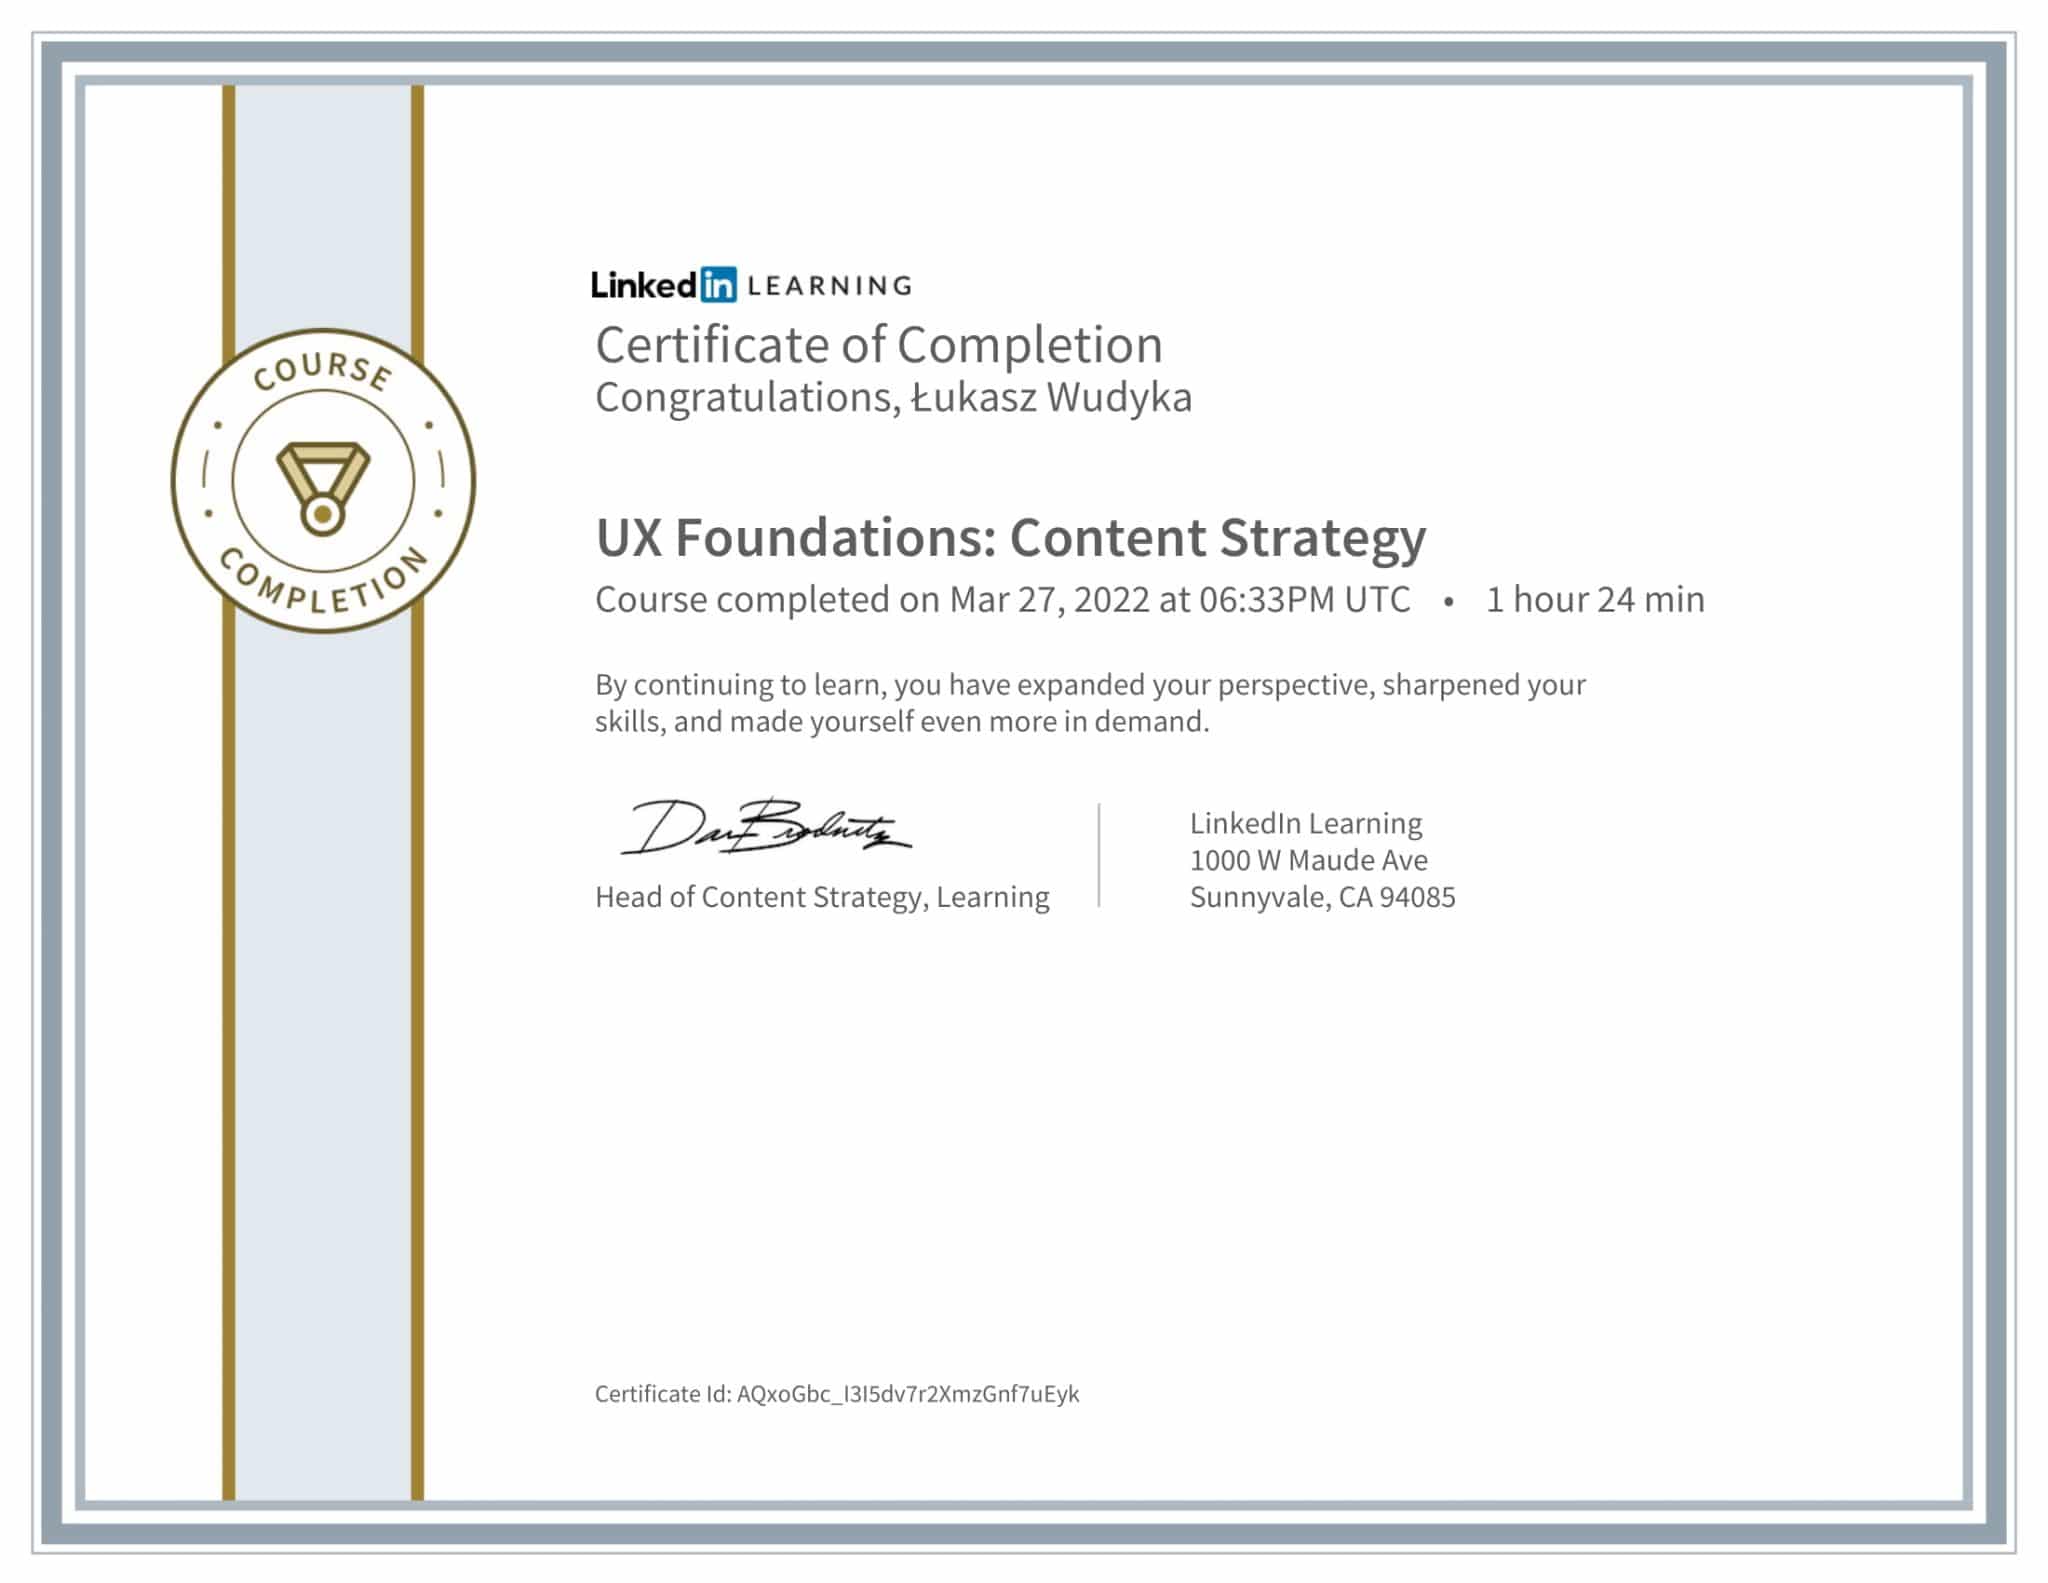 CertificateOfCompletion_UX Foundations Content Strategy-1